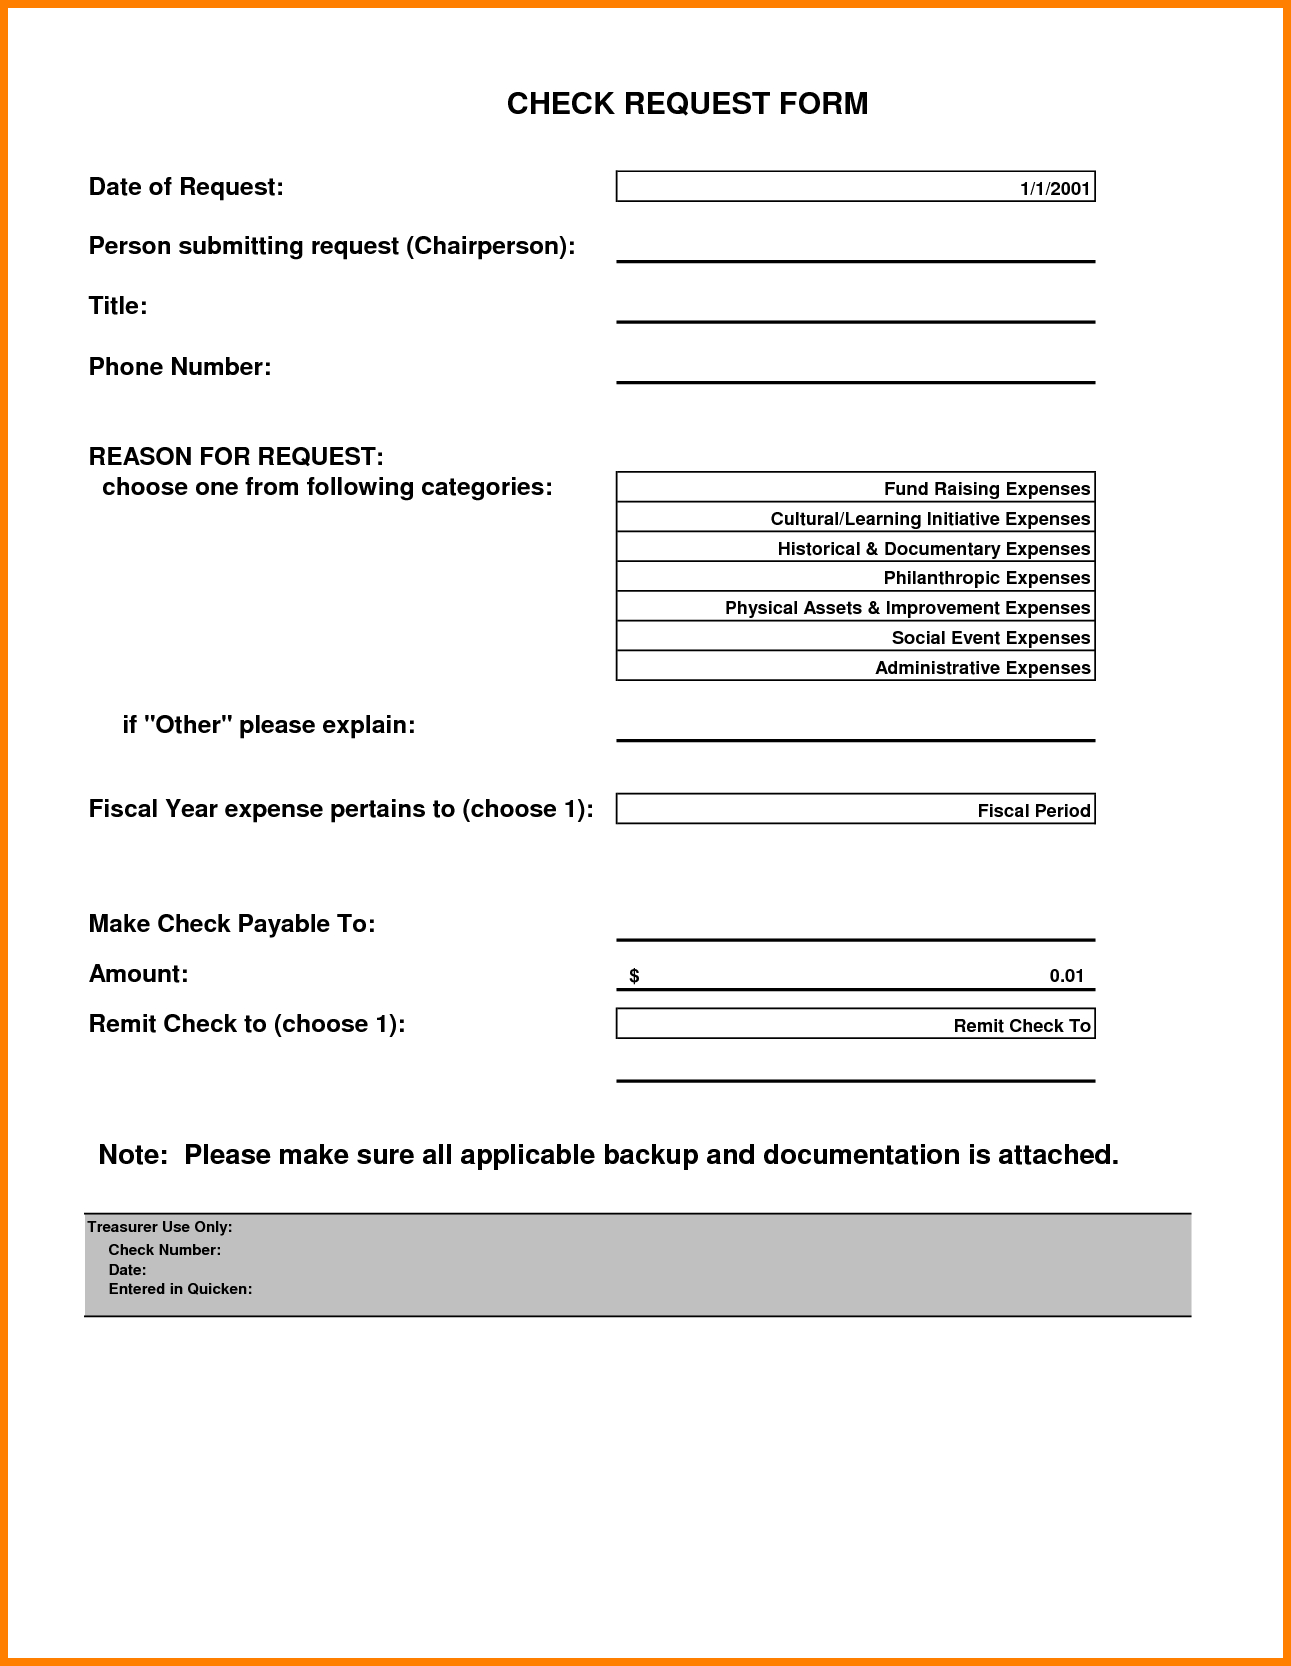 Check Request Form Template Excel 4 Fabulous Florida Keys Regarding Check Request Template Word